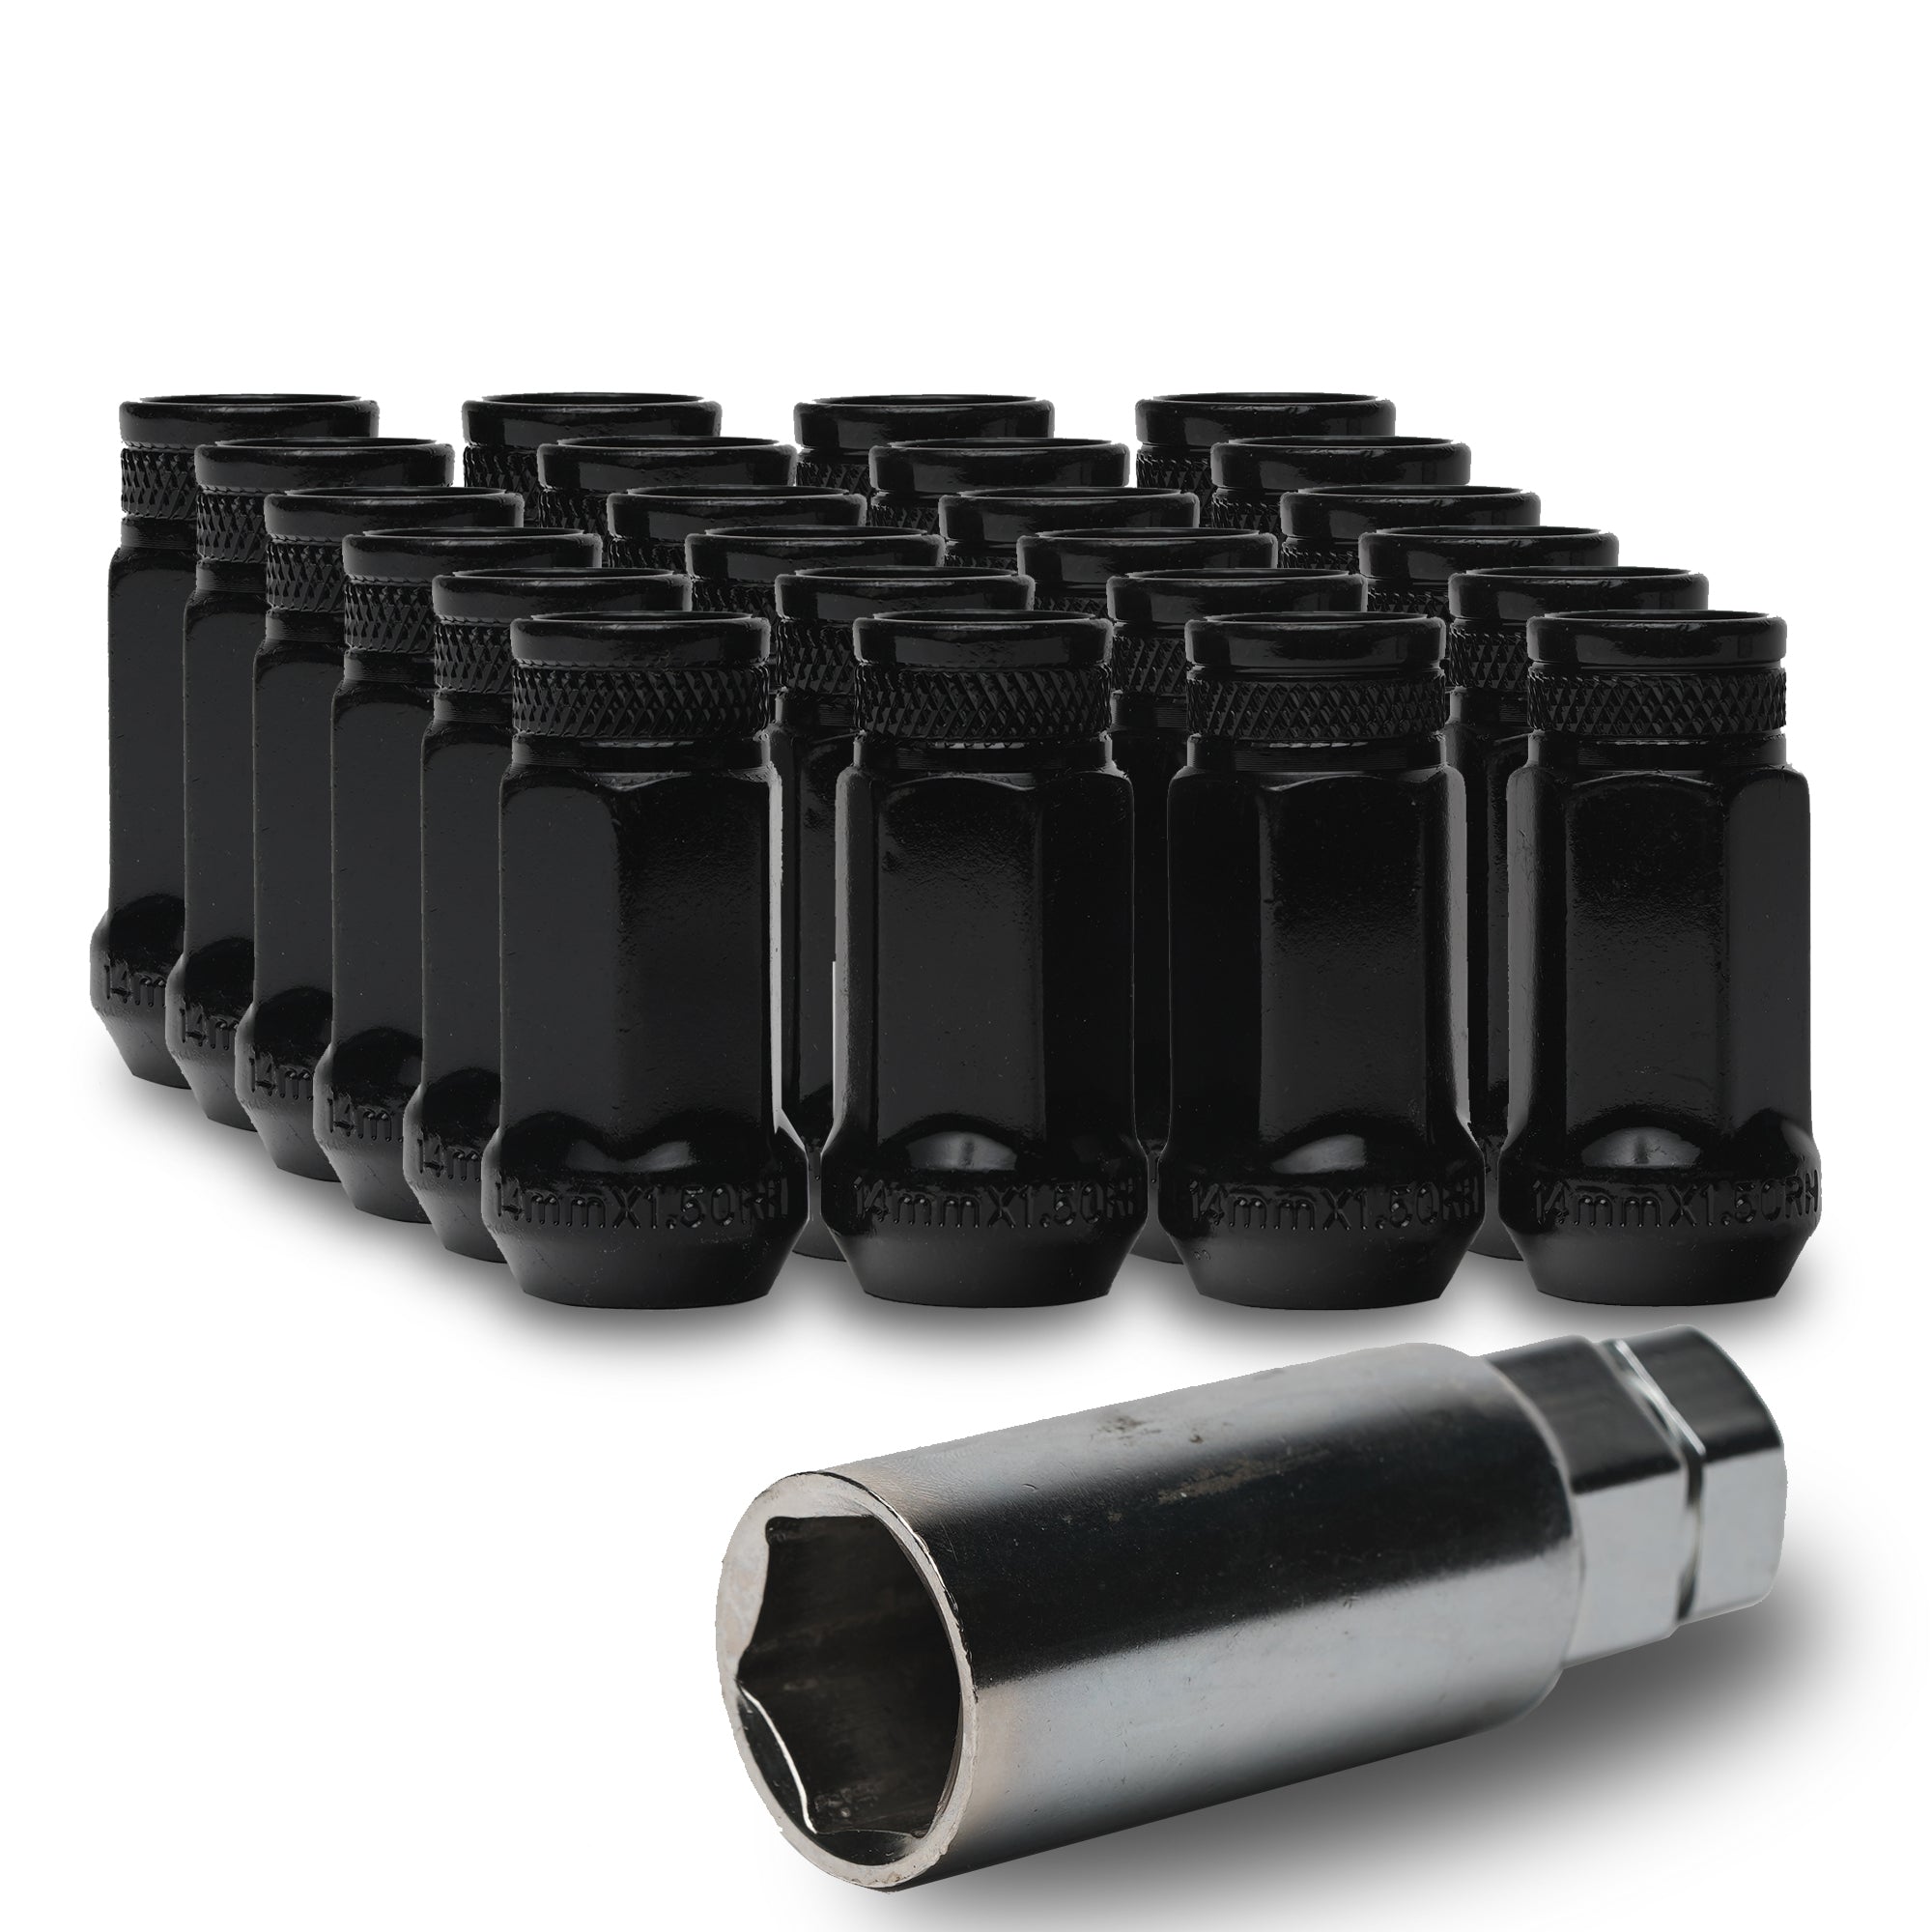 Hex Open End Lug Nuts (14x1.5) | Tundra, F150, Chevy, GMC, Jeep